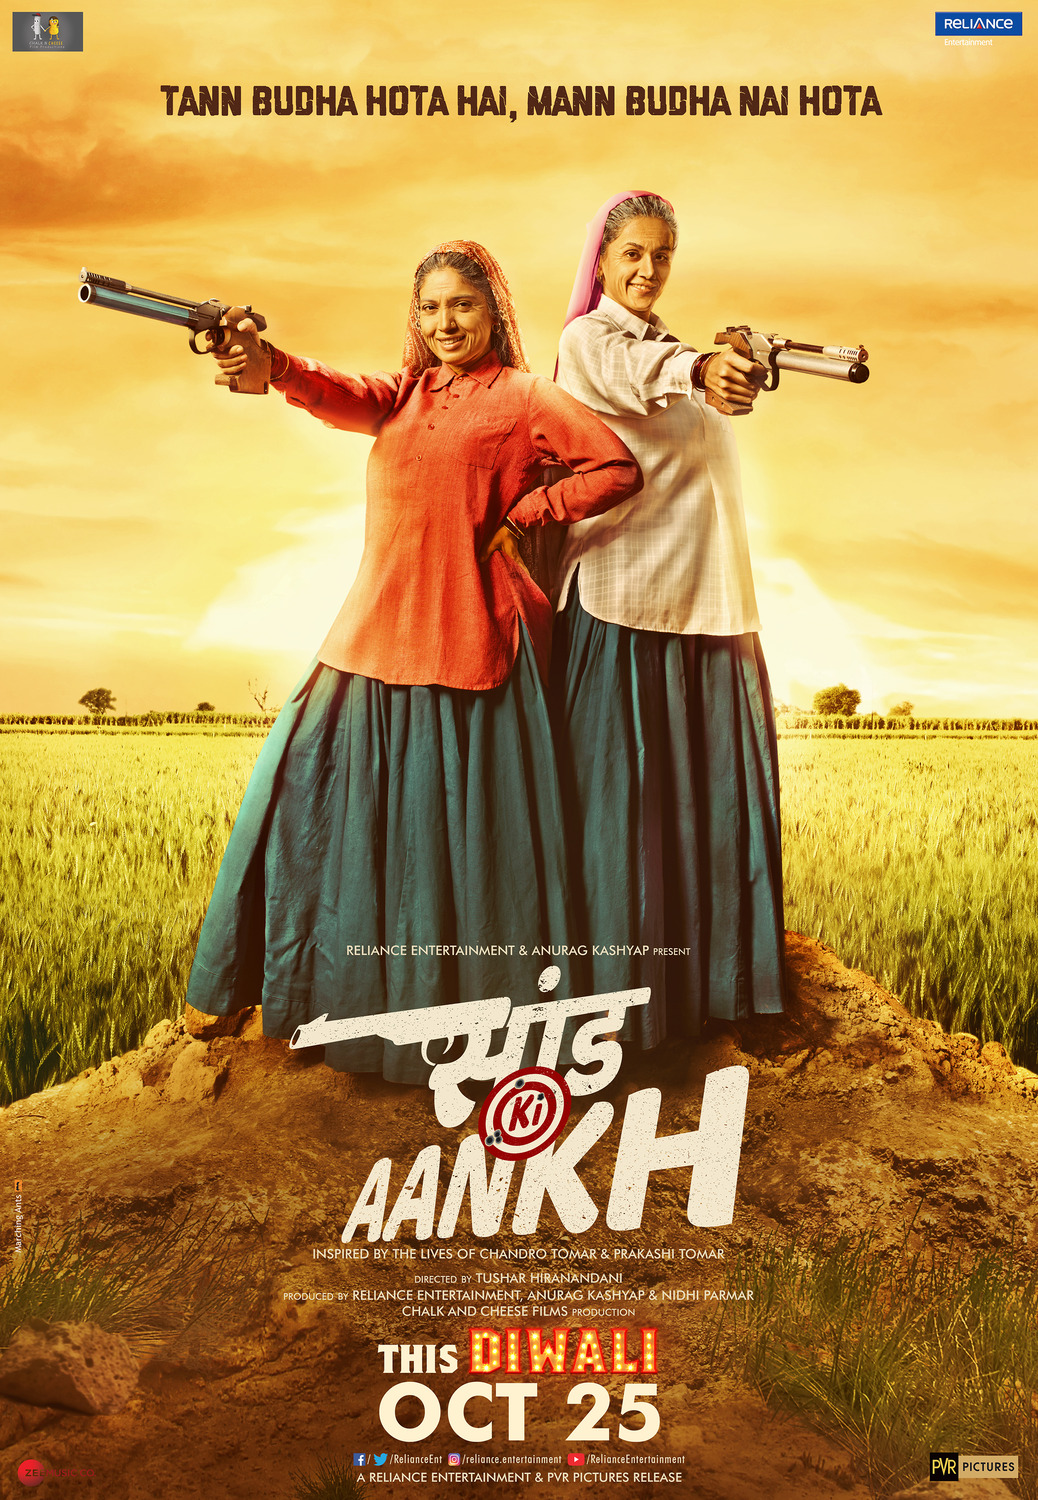 Extra Large Movie Poster Image for Saand Ki Aankh (#2 of 4)